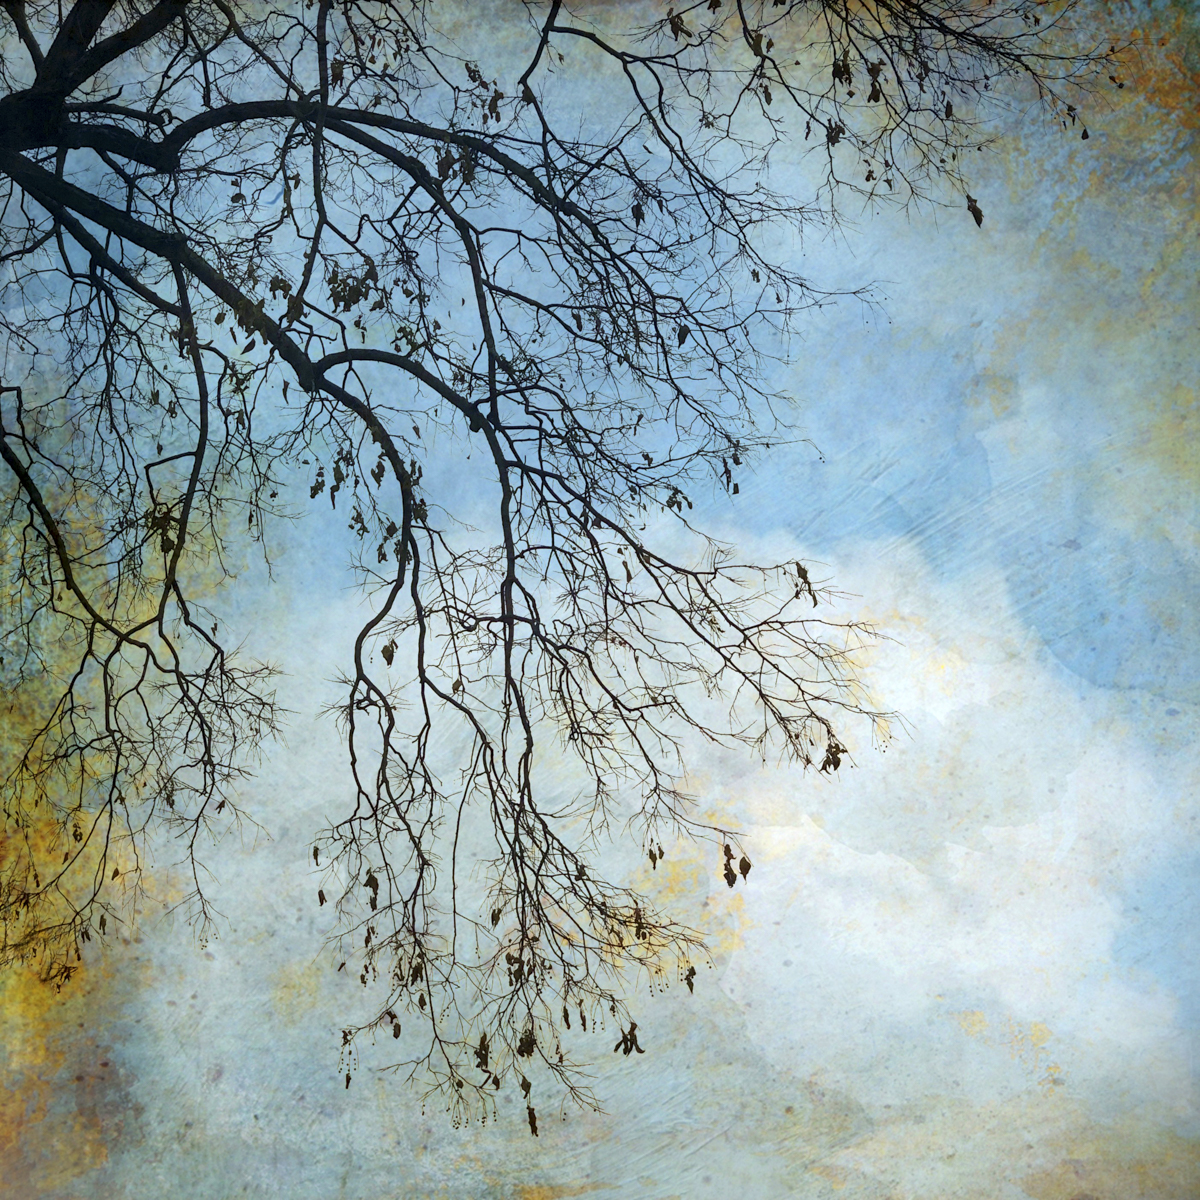 Wendi Schneider, The Truth of Winter Branches, 2019, Catherine Couturier Gallery